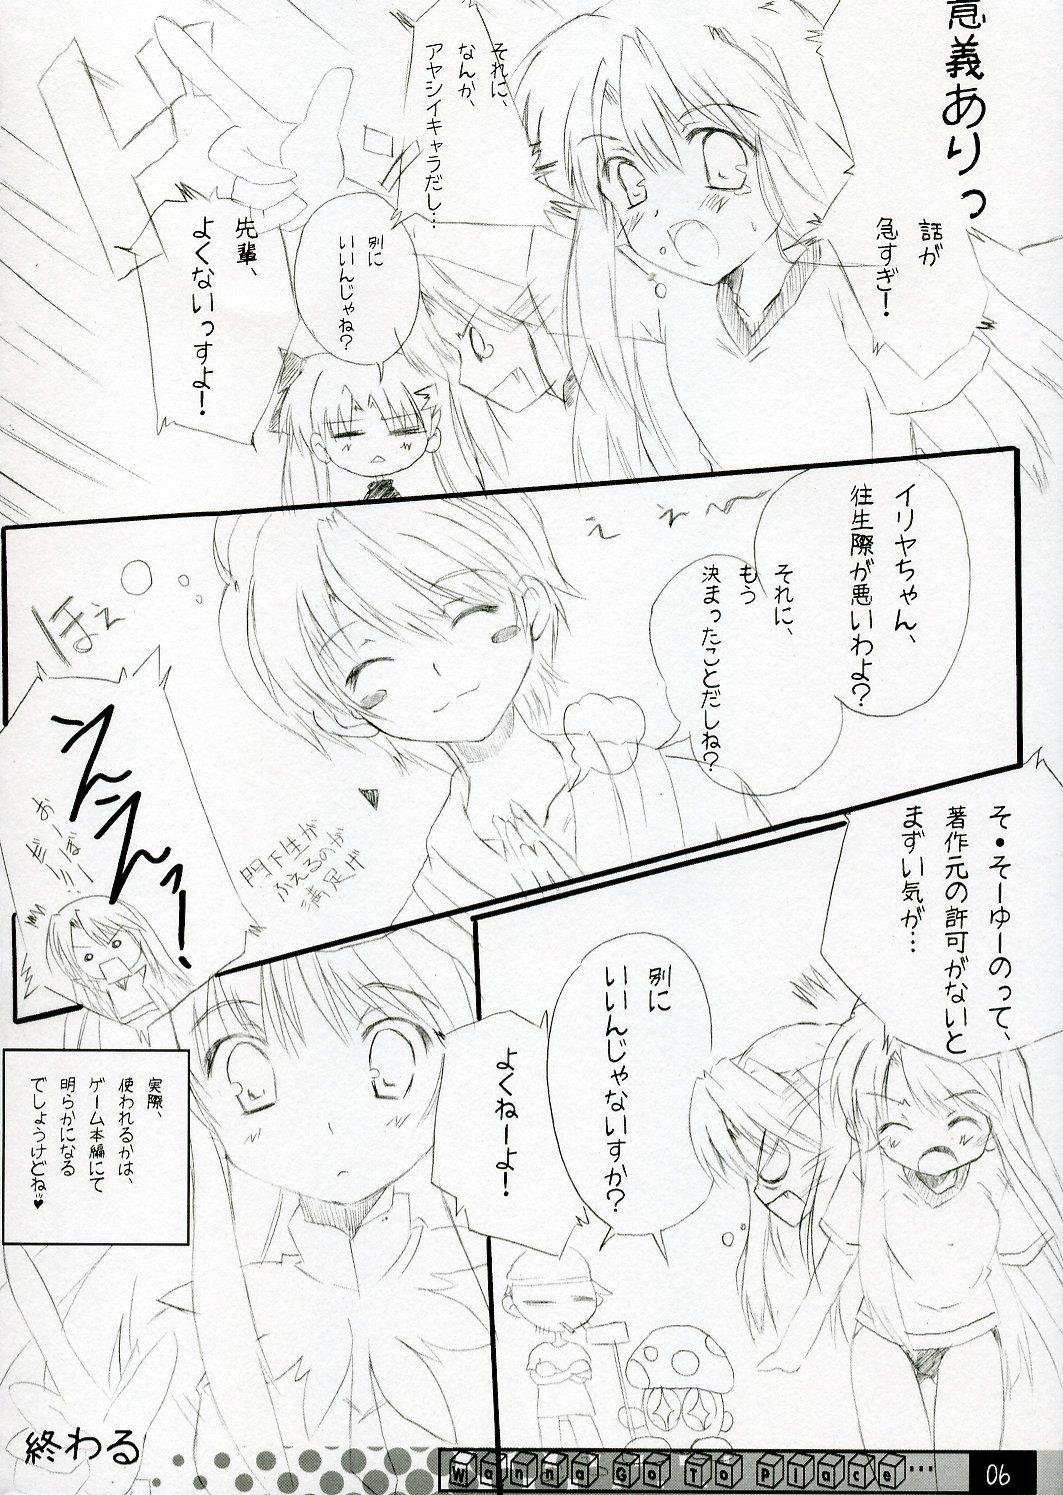 Old And Young Wanna Go To A Place... - Fate stay night Higurashi no naku koro ni Cum Swallowing - Page 5